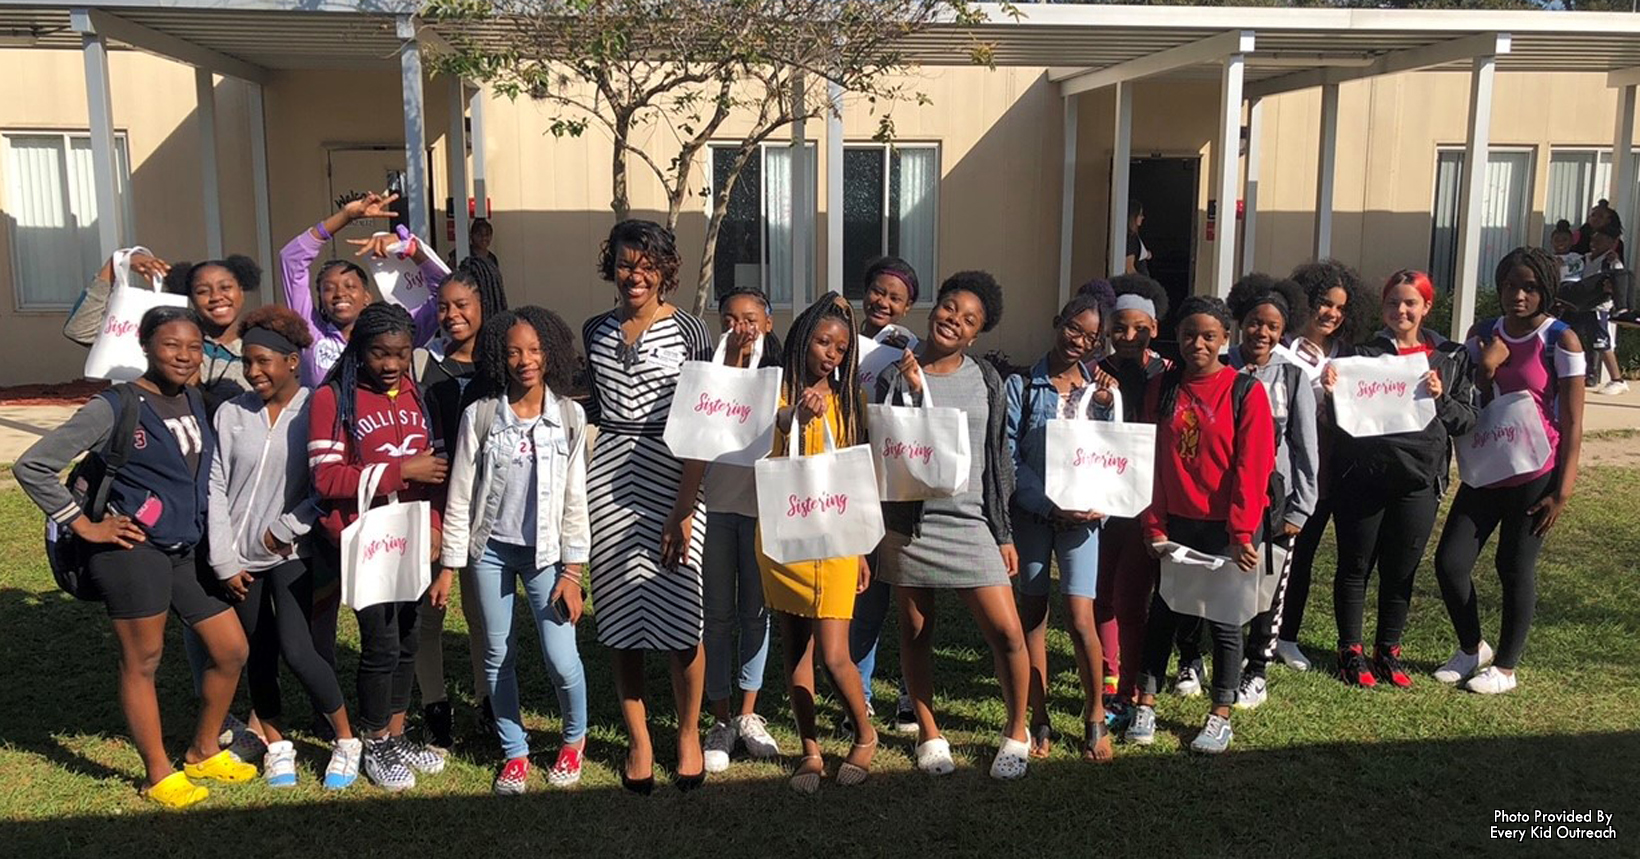 EKO's Executive Director Michelle Reynolds mentoring "her girls" from College Park Middle School. They all received "Sister'ing" bags to remember the value working together as a community.